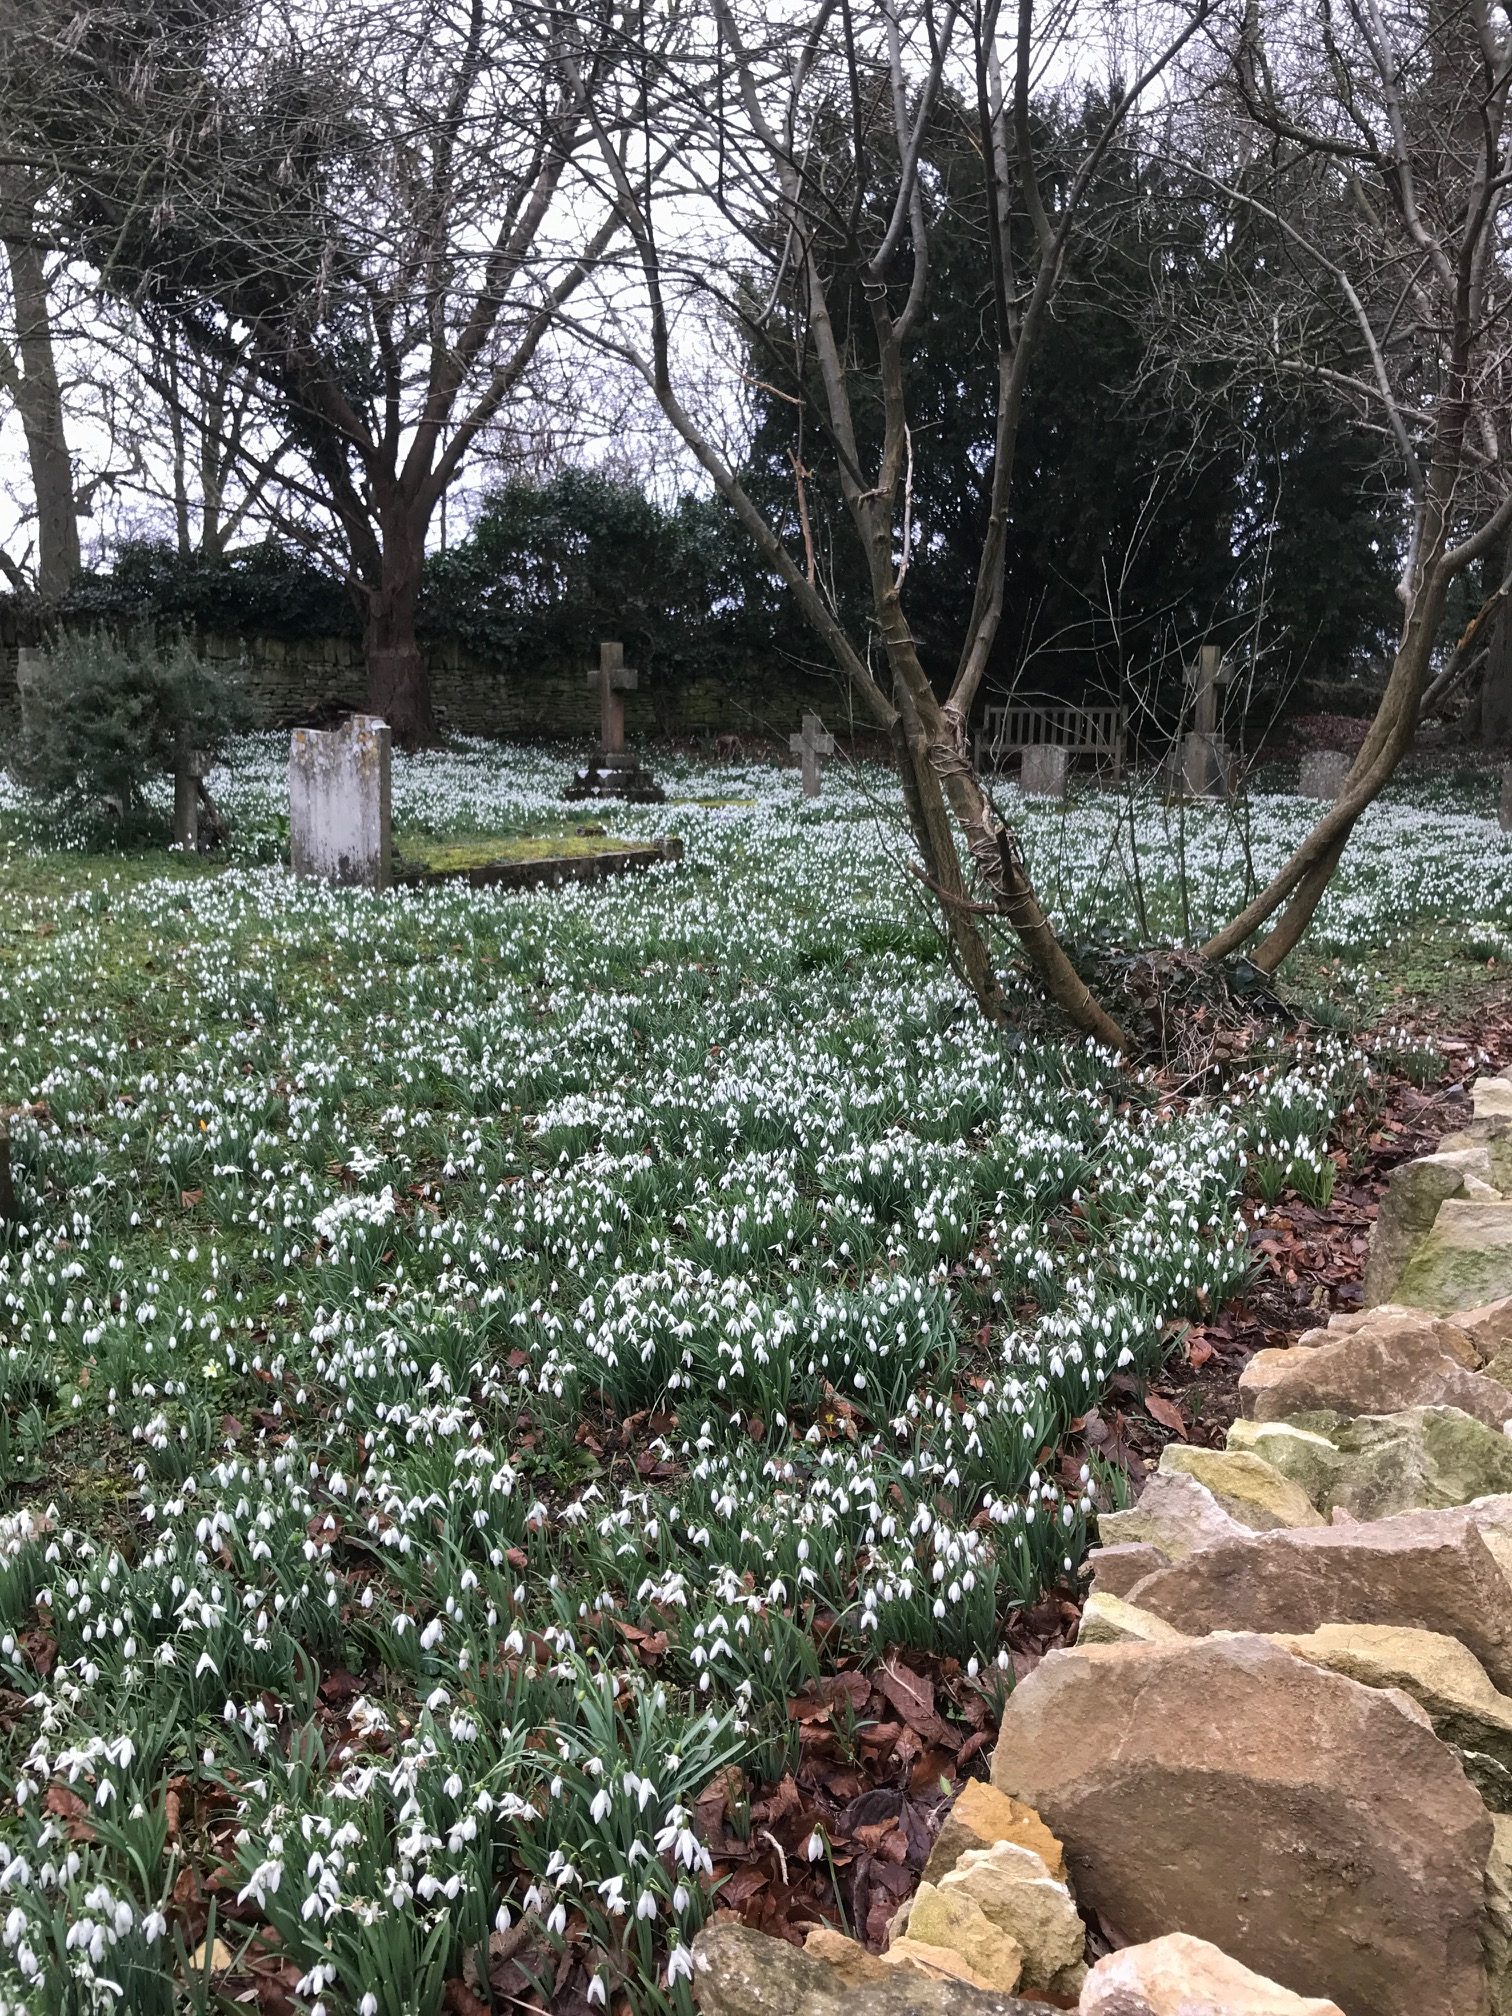 Cotswolds: Snowdrops at St John's, Edge.